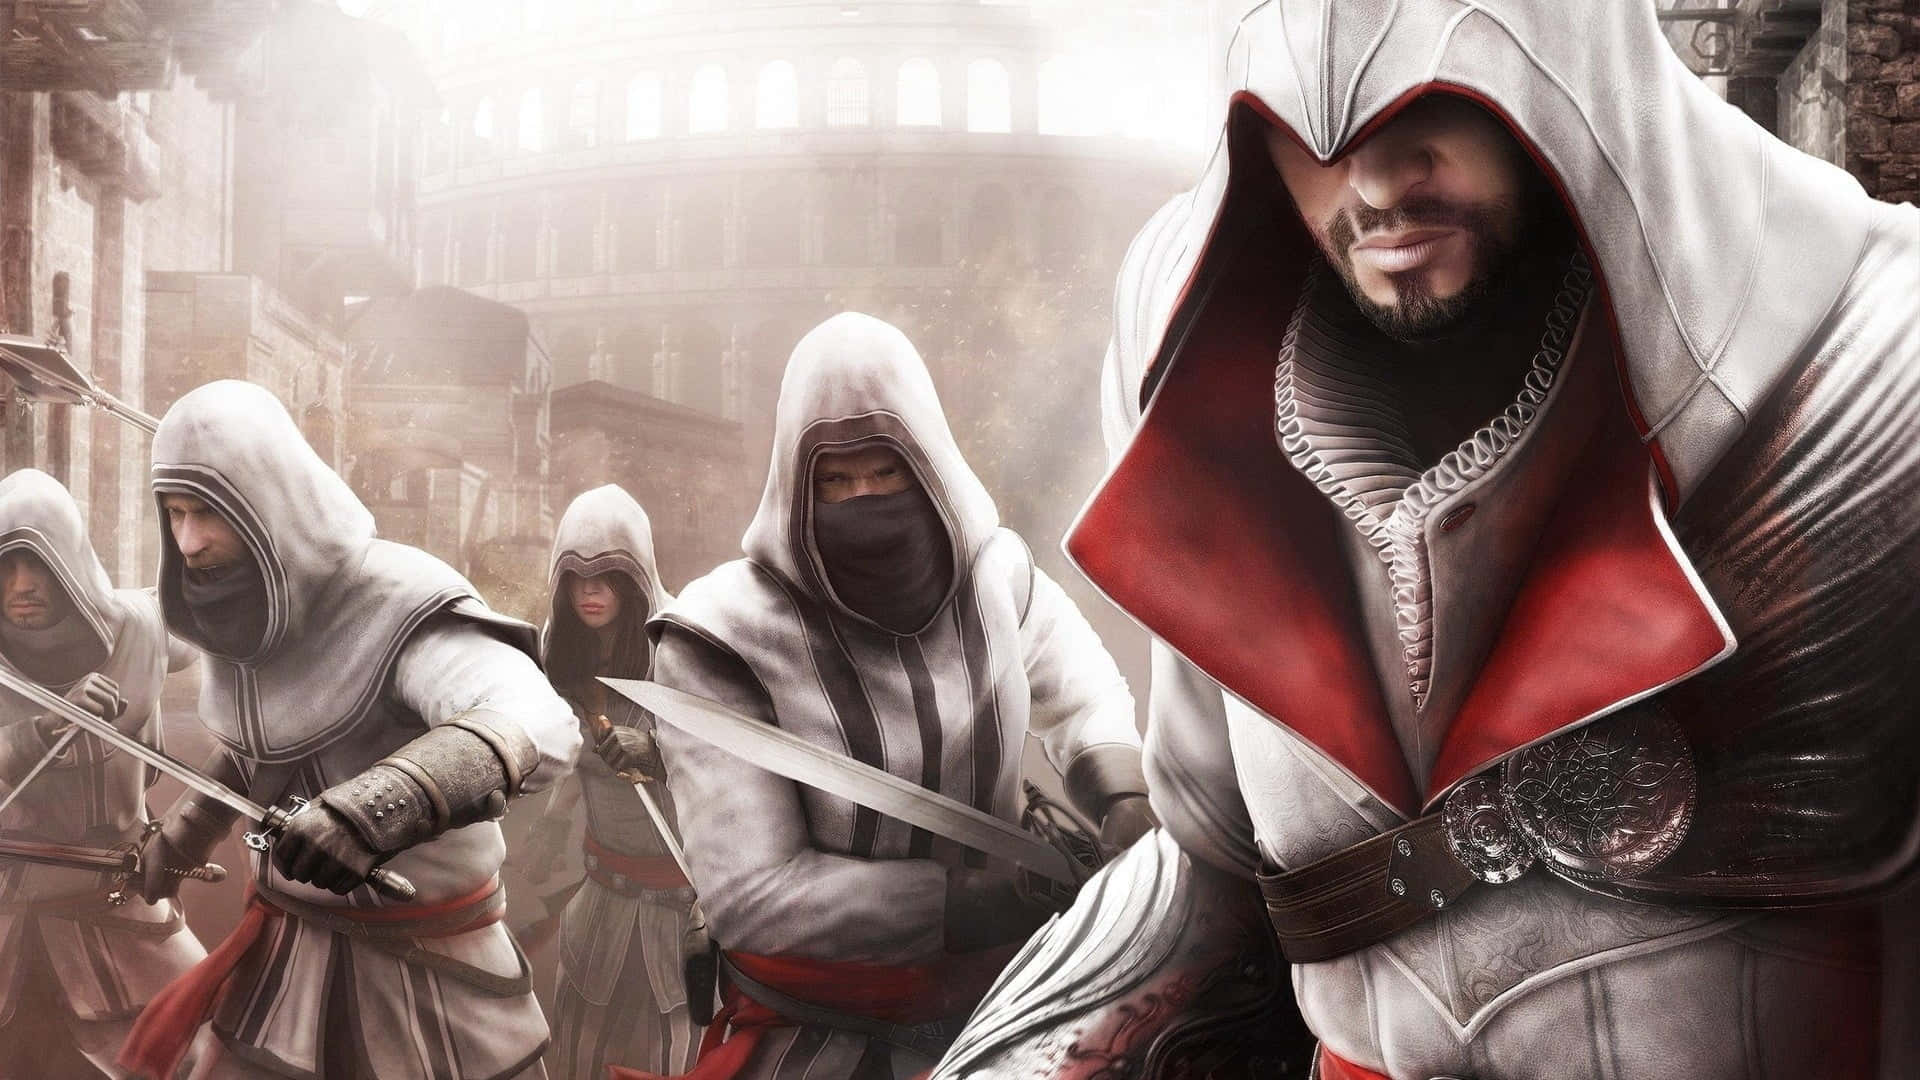 Caption: Desmond Miles in action inside the Animus Wallpaper